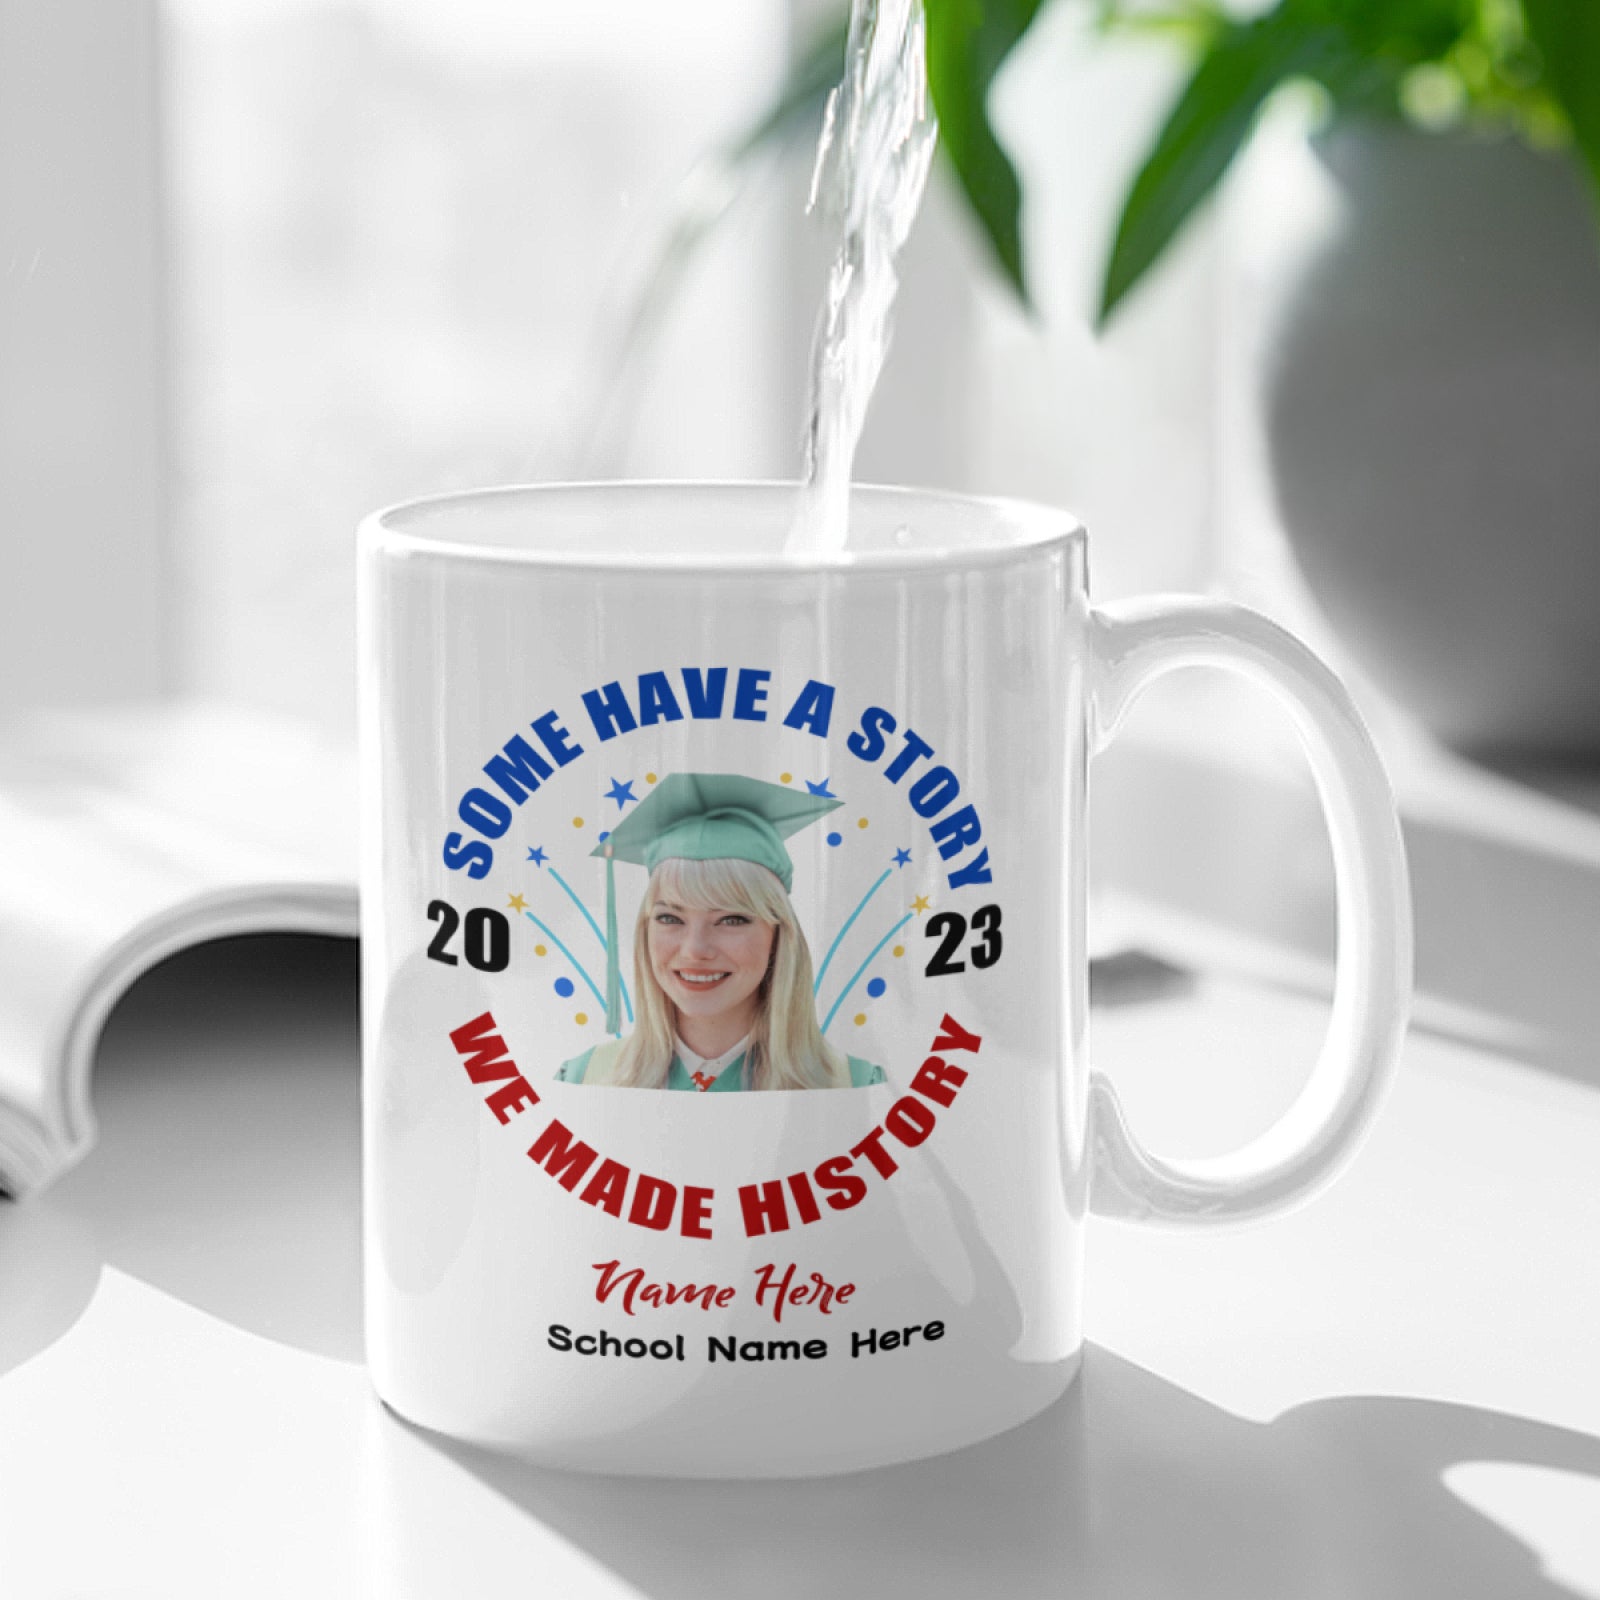 Class Of 2023 Graduation Custom Mug with Name & School, Personalized Mugs Best Graduation Gifts for Women Man Daughter Son Sisters Friends - colorfulcustom